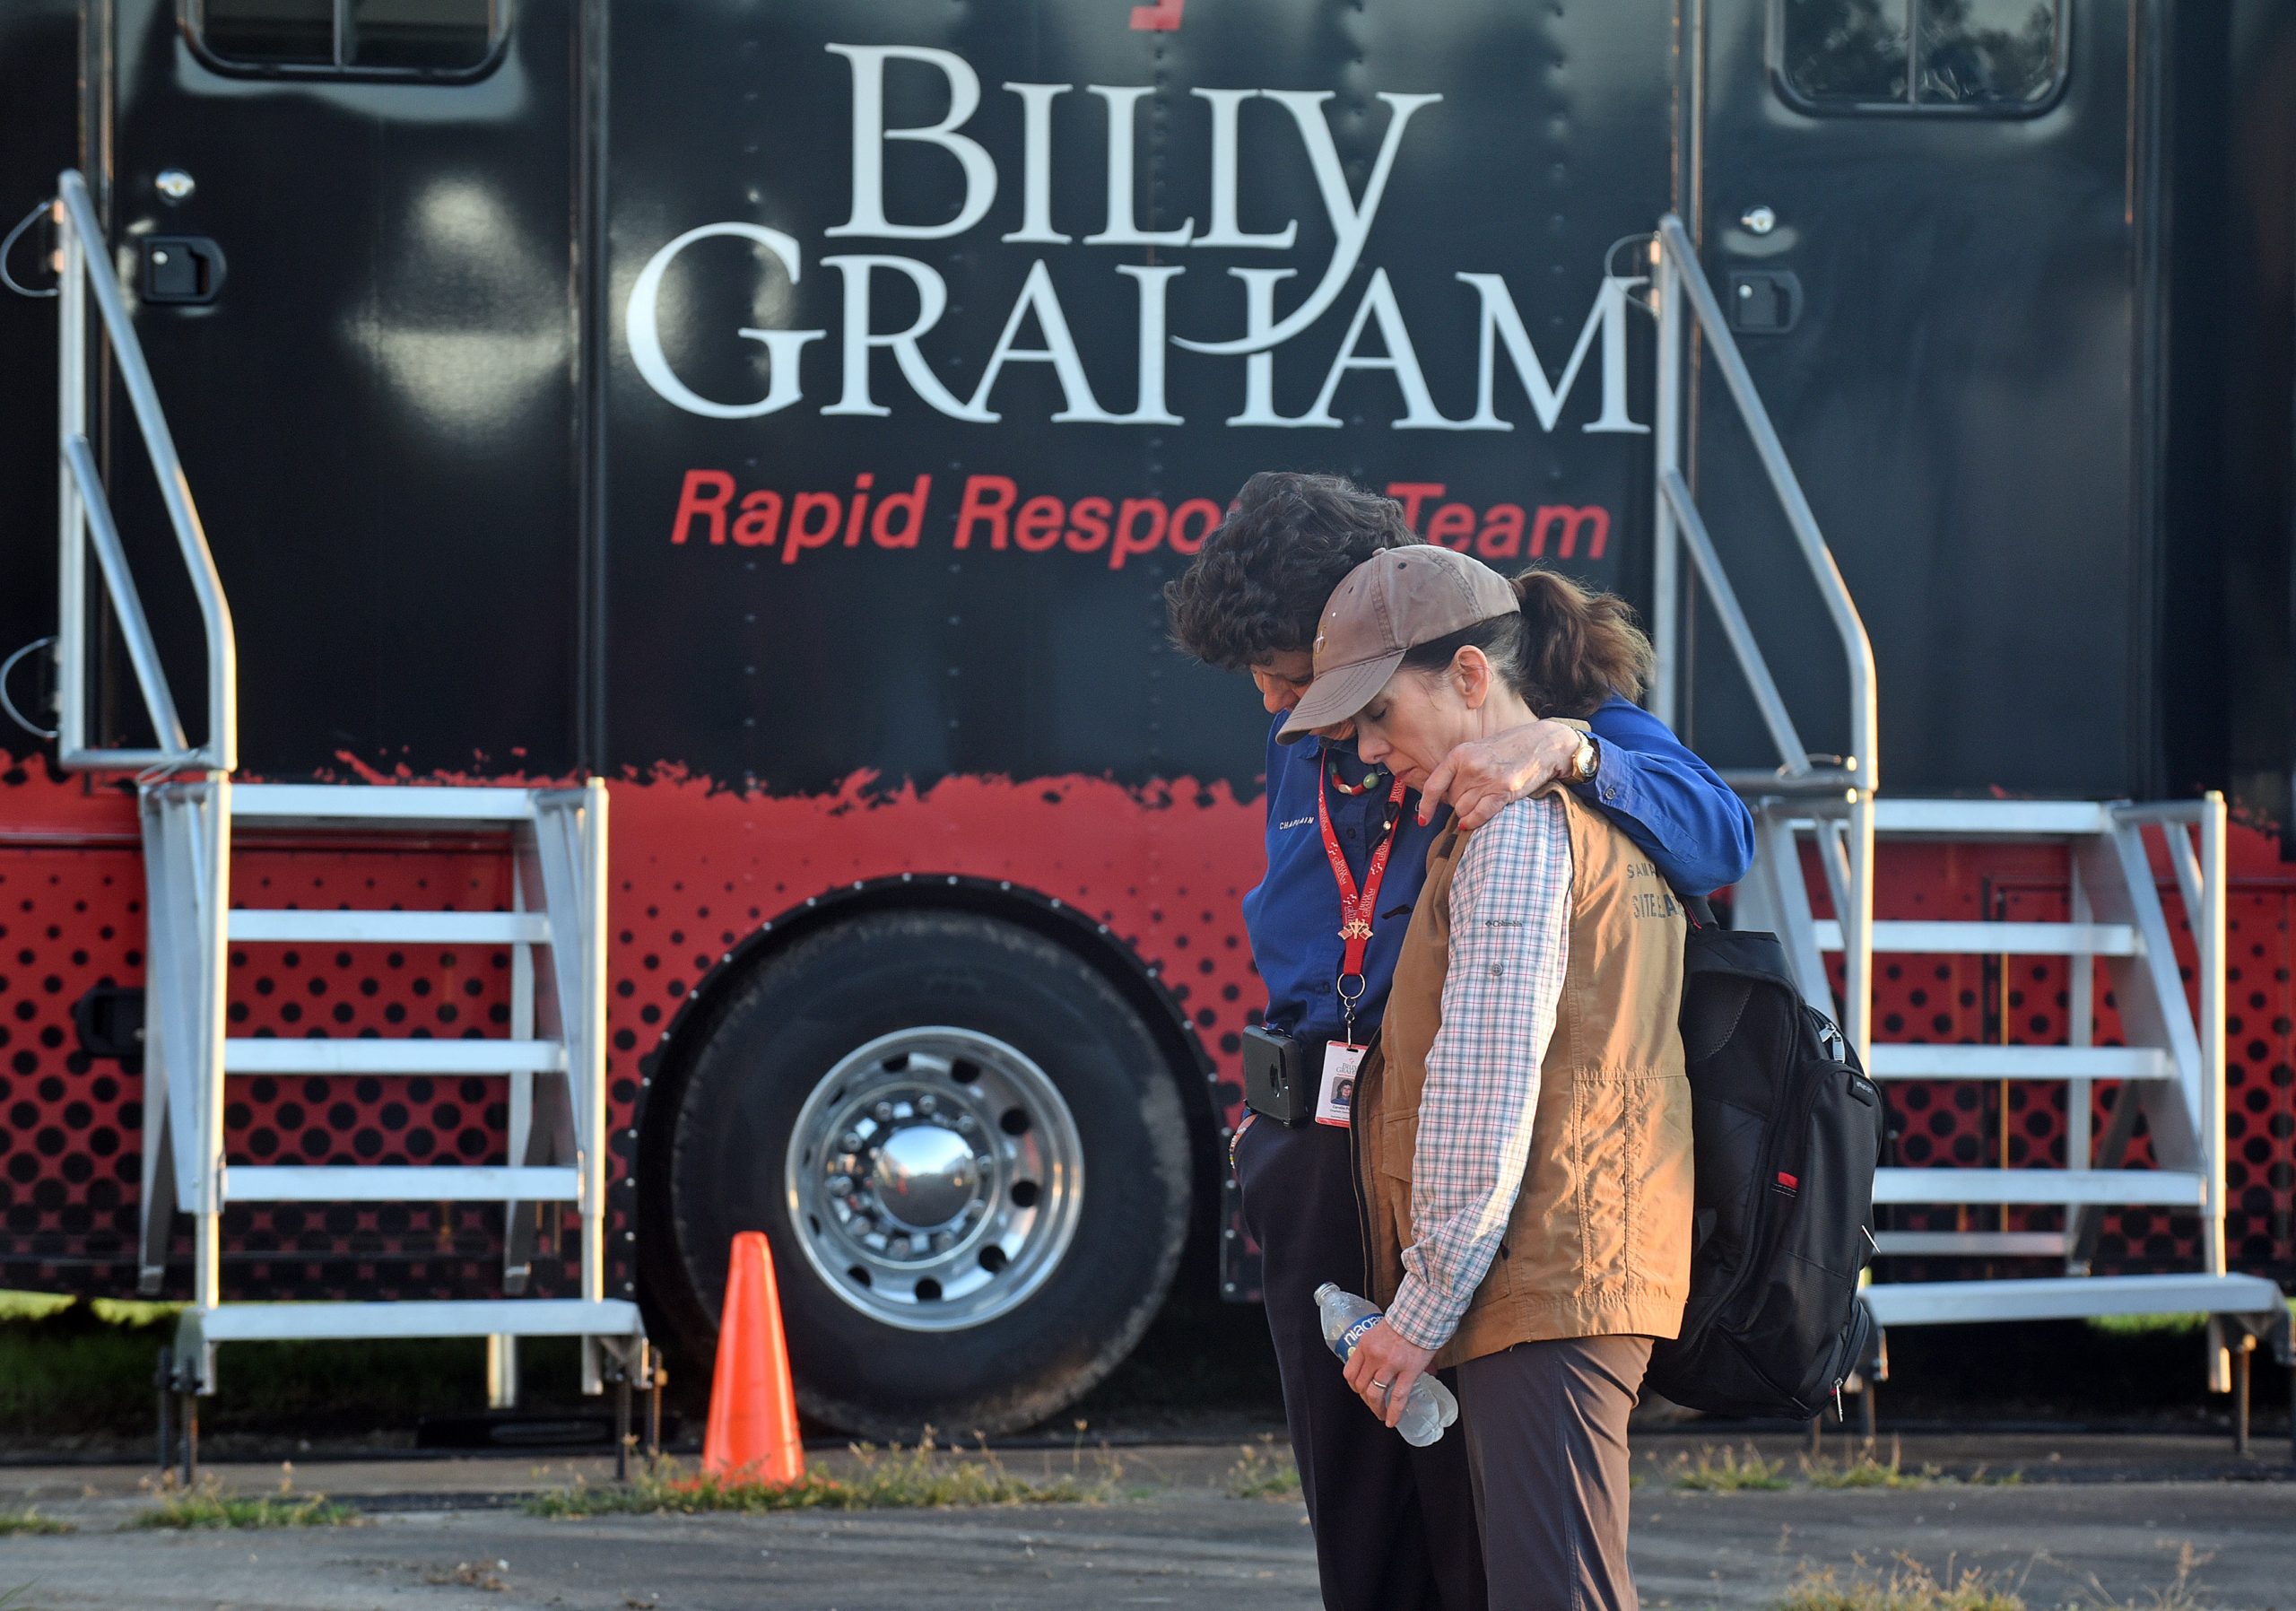 Billy Graham Rapid Response Team Deploys to Tennessee to Provide Emotional and Spiritual Support After Ice Storm